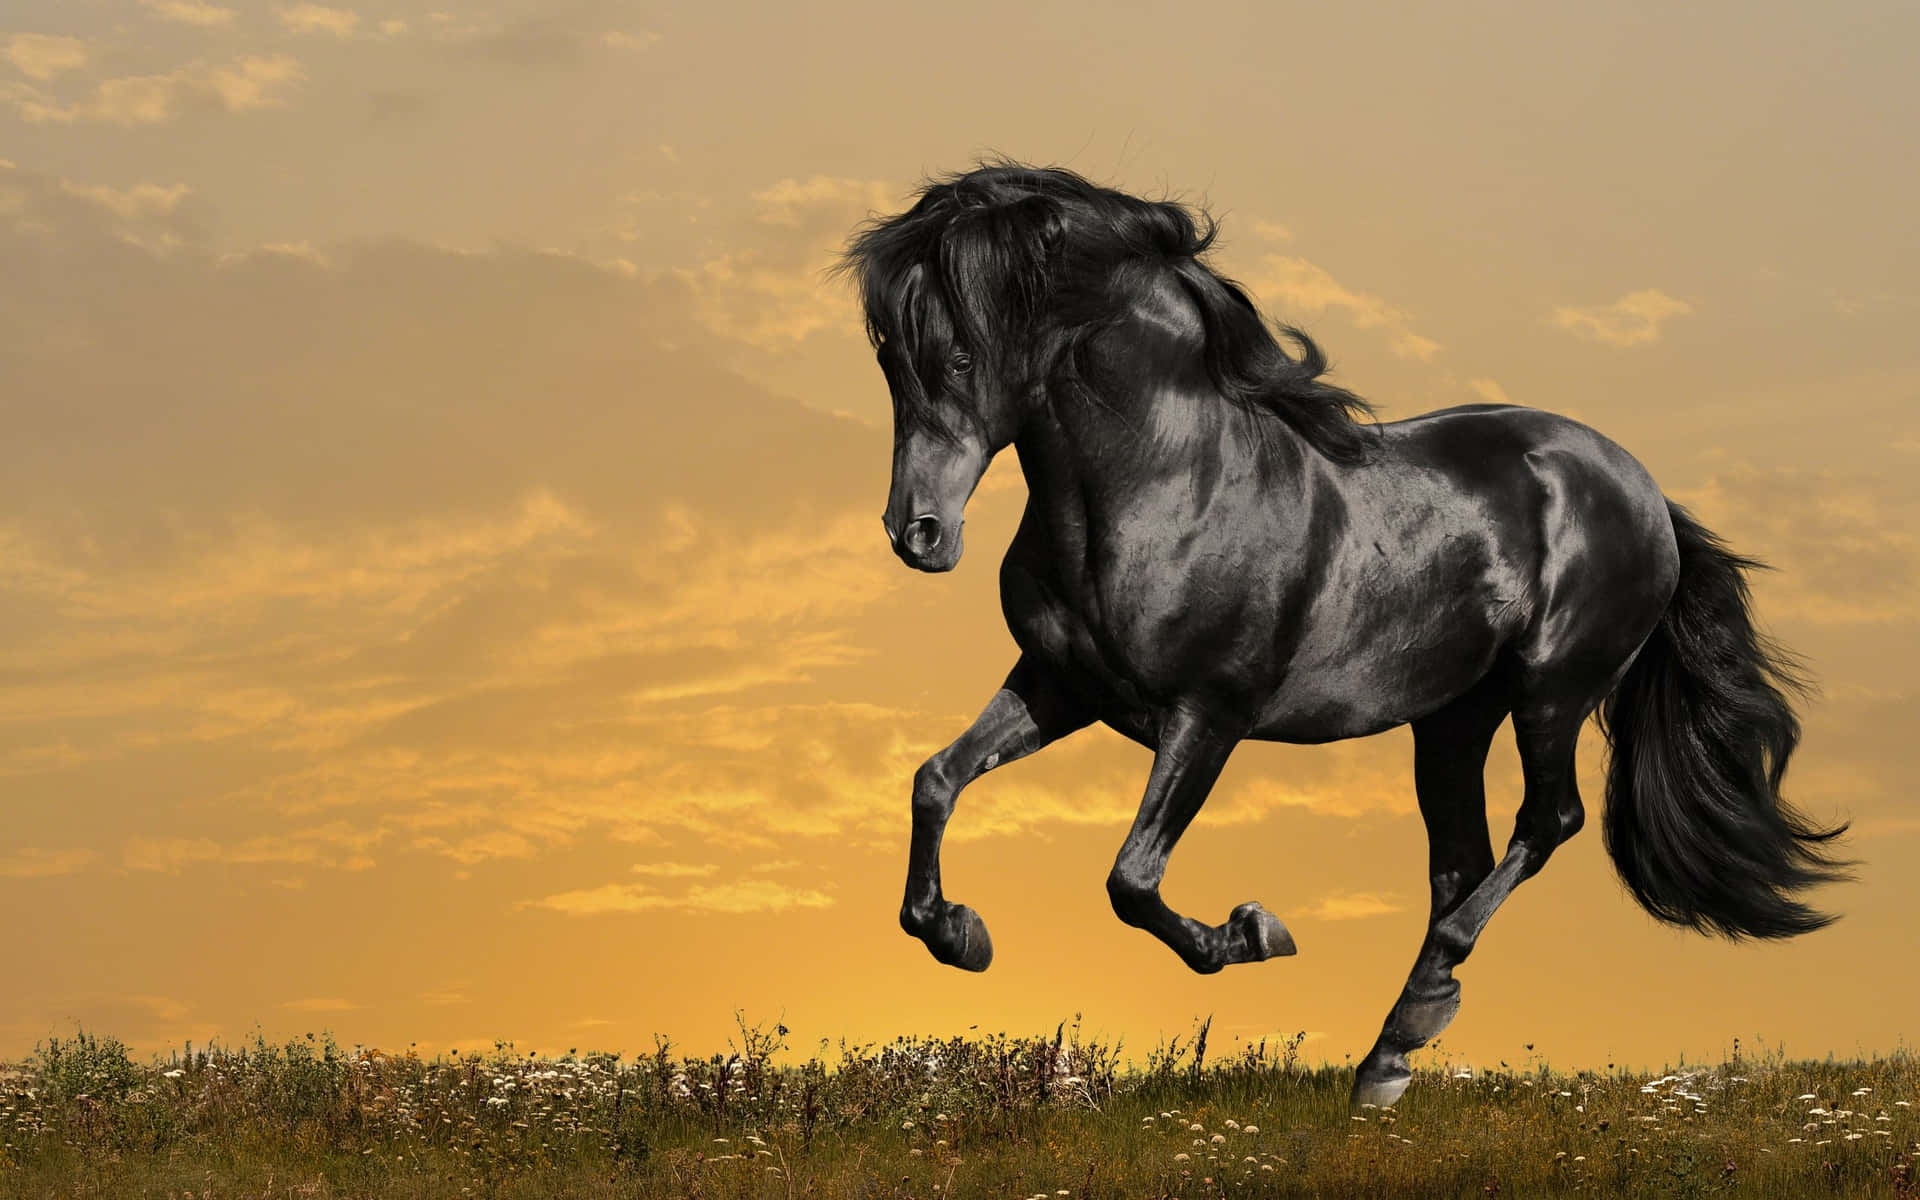 A Black Horse Running In The Field